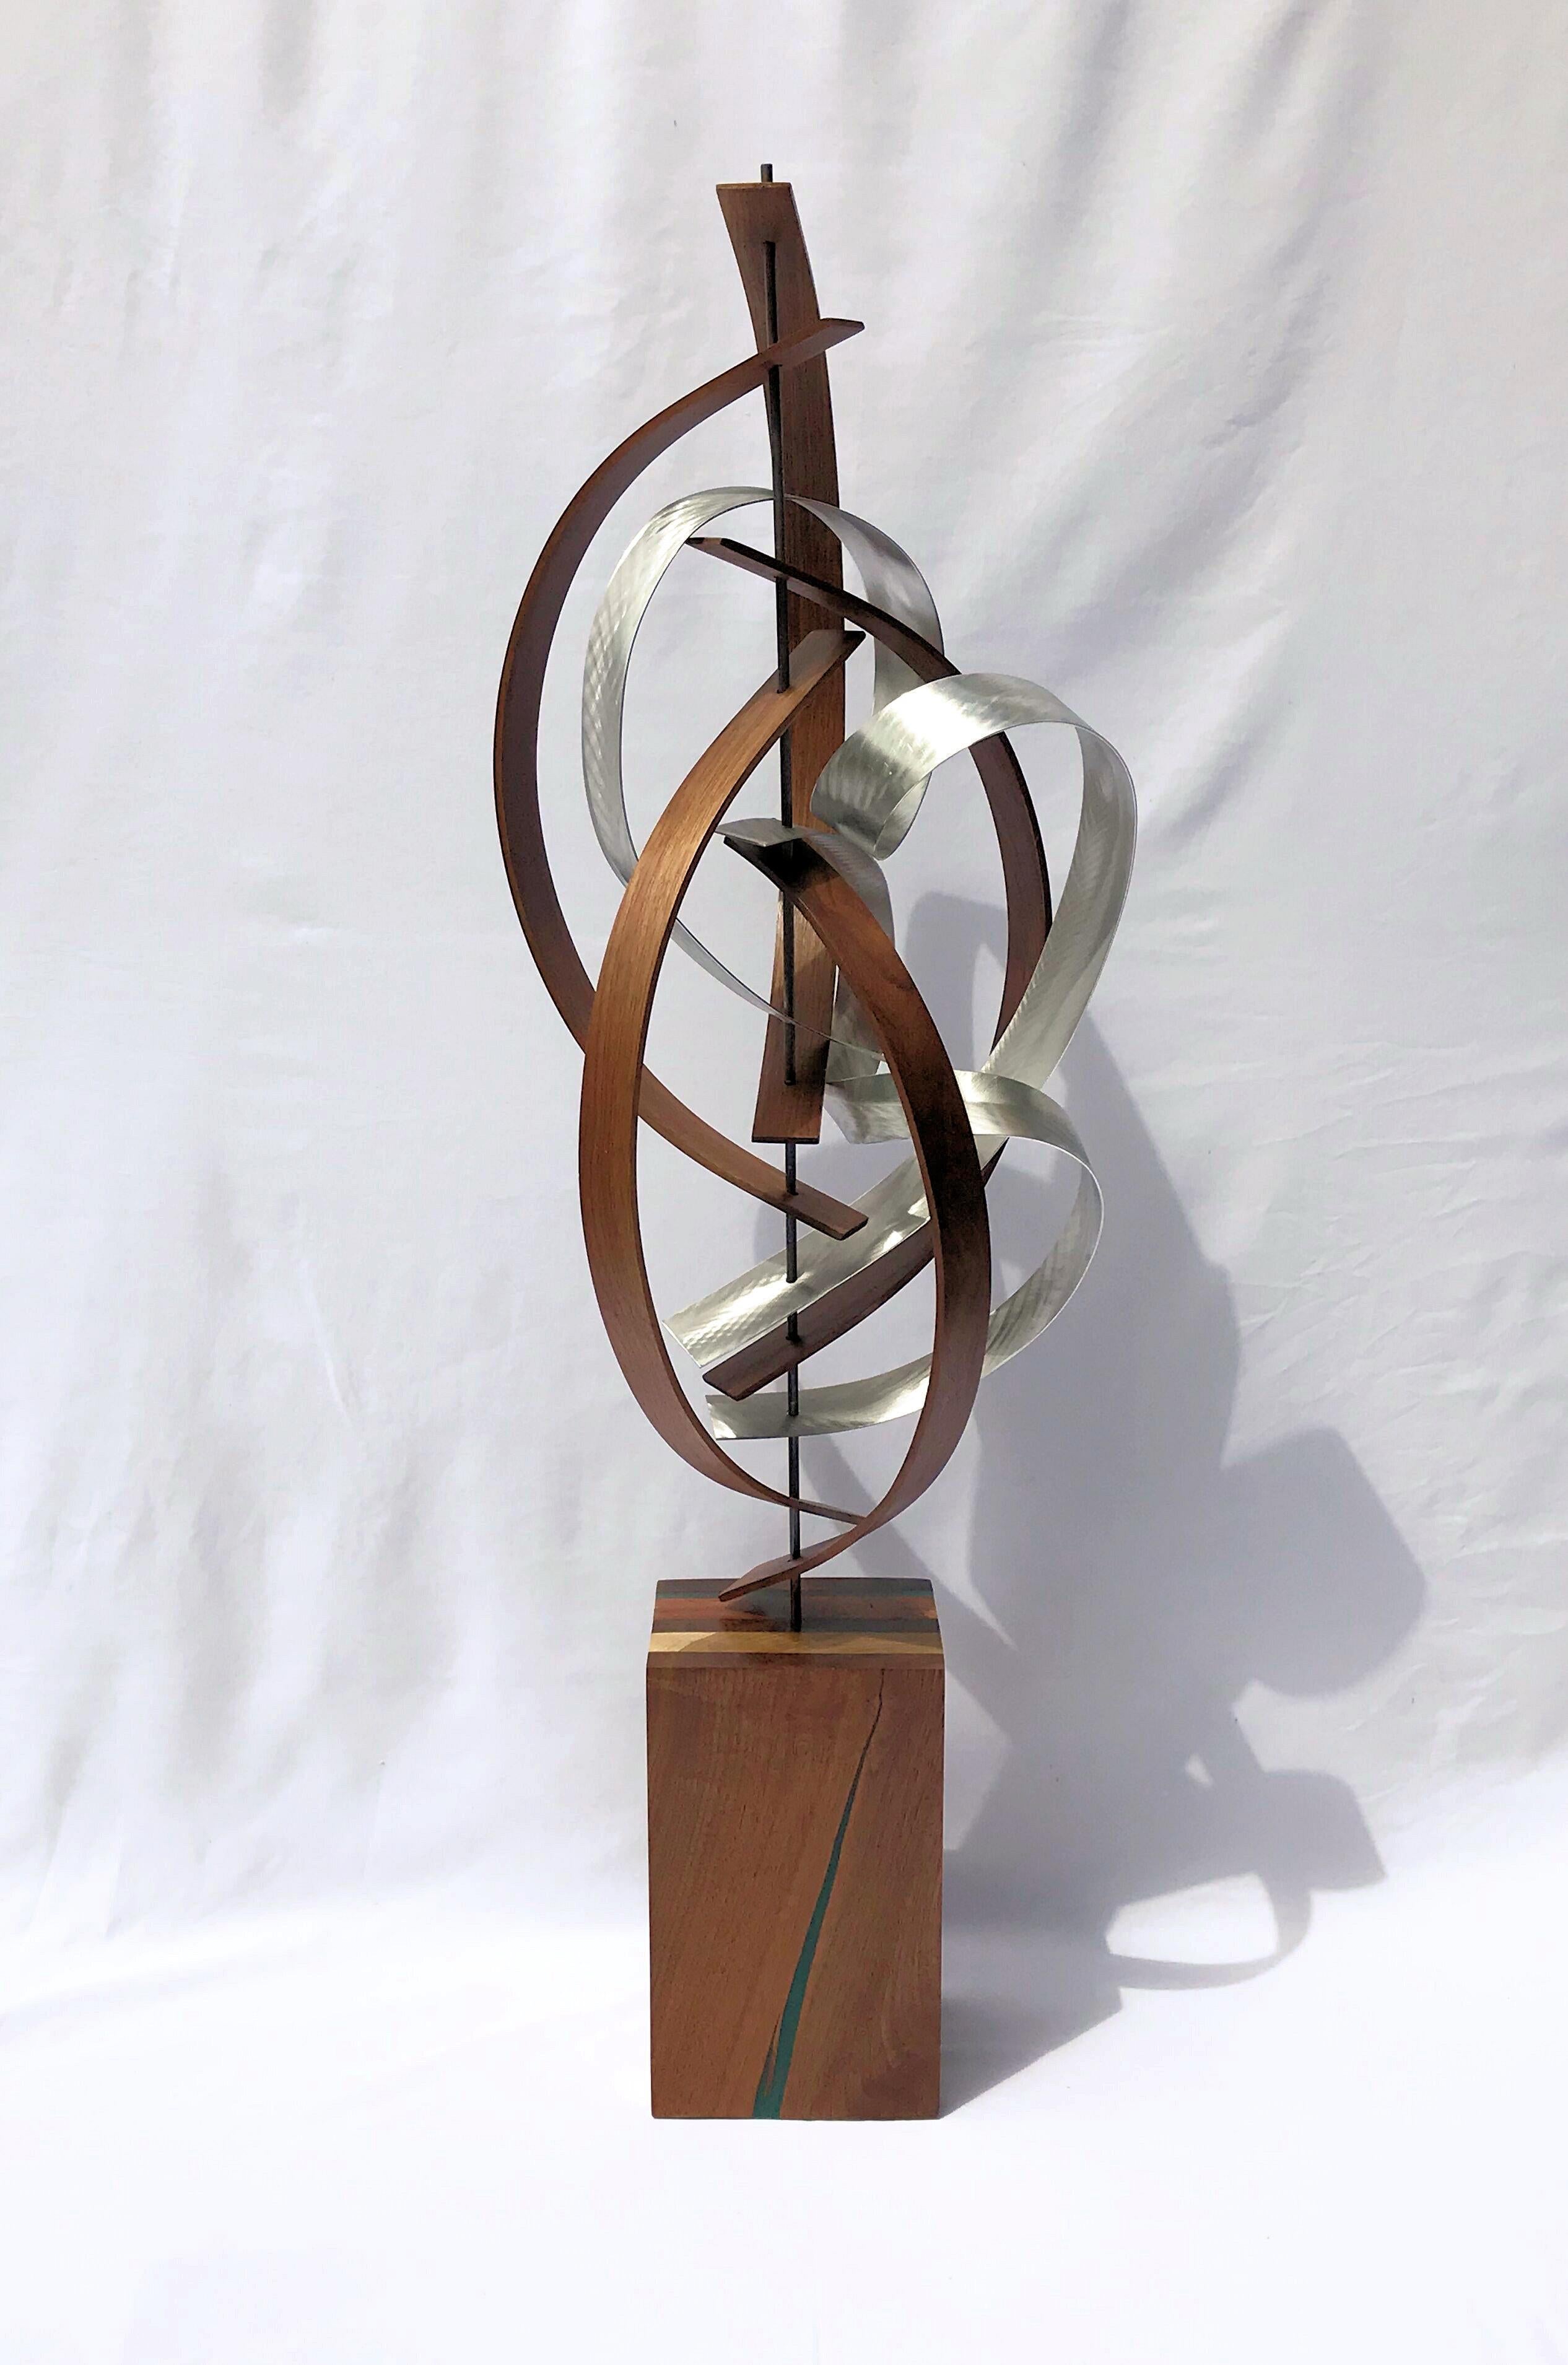 Title: Bubbly
Description: Black walnut slats bent about a steel rod with bubbling ground aluminum accent strips. Sculpture base features laminated walnut, cherry, poplar with a turquoise epoxy inlay and a satin finish.

Jeff Linenkugel was born and